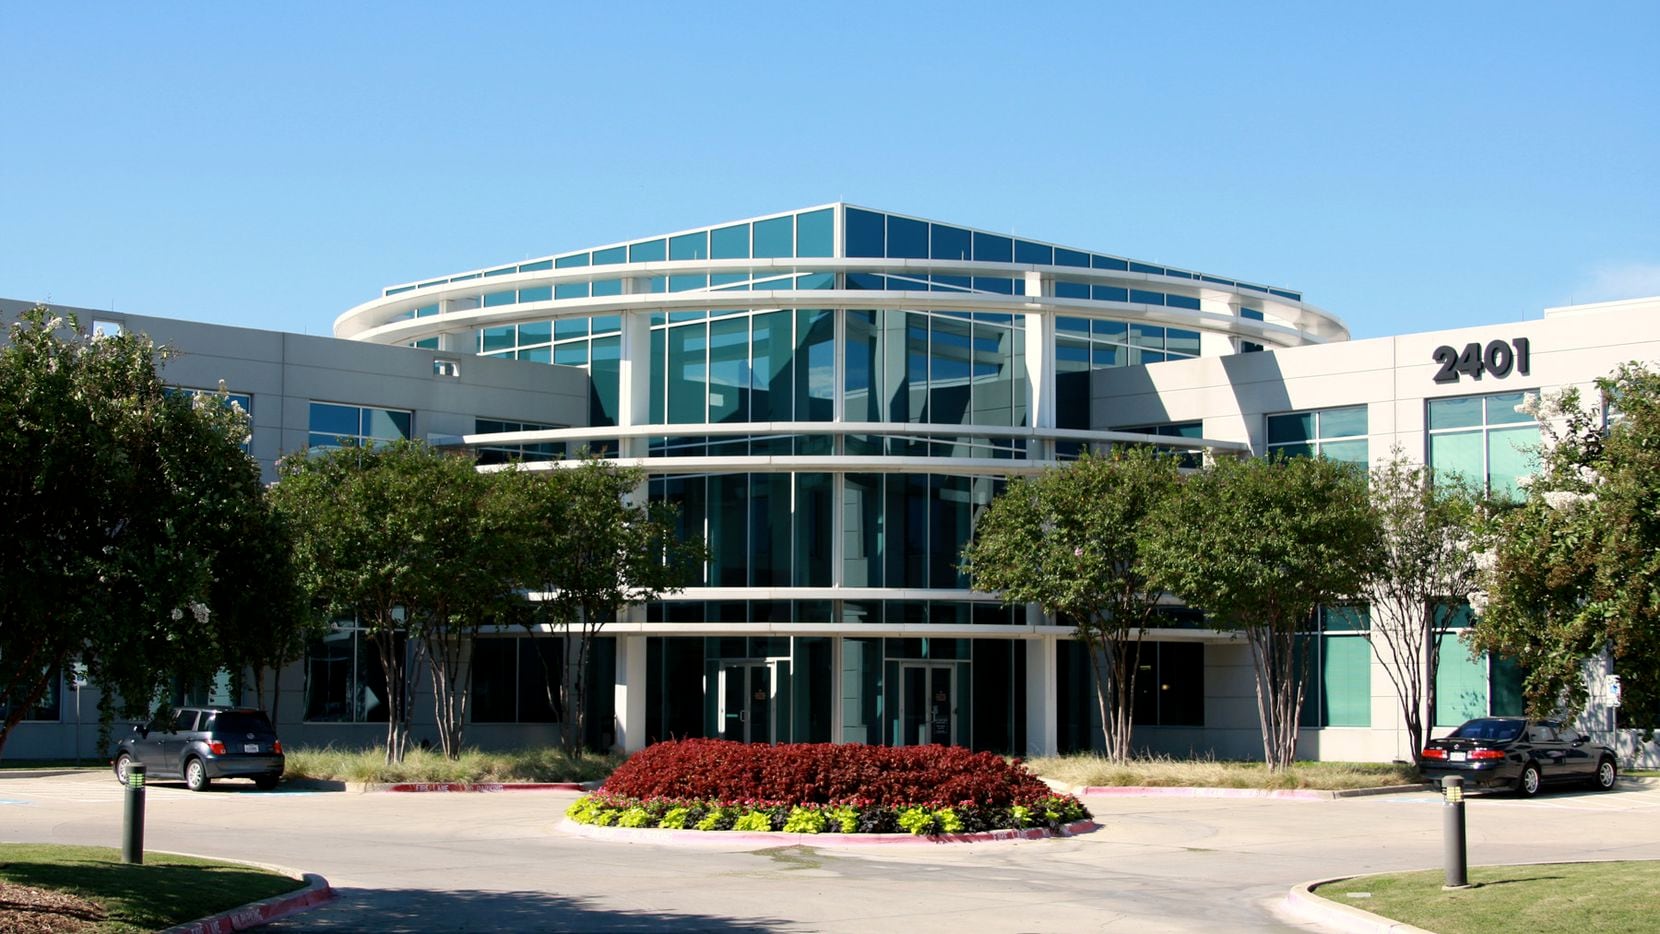 Abacus Group has leased office space at 2401 Internet Blvd. in Frisco.